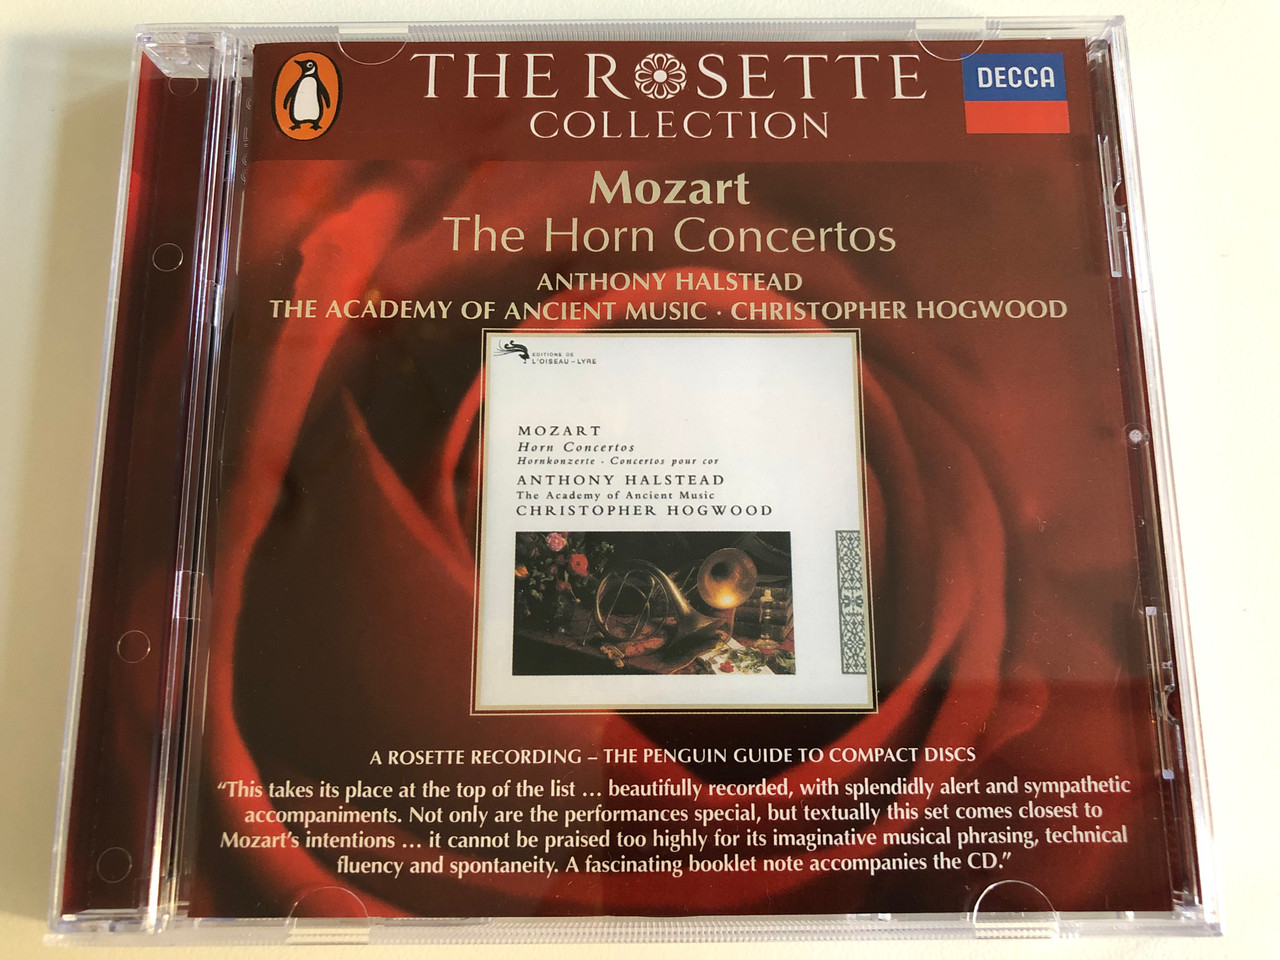 https://cdn10.bigcommerce.com/s-62bdpkt7pb/products/0/images/193384/The_Rosette_Collection_Mozart_The_Horn_Concertos_Anthony_Halstead_The_Academy_Of_Ancient_Music_Christopher_Hogwood_A_Rosette_Recording_-_The_Penguin_Guide_To_Compact_Discs_Decca_Audio_1__35365.1632932933.1280.1280.JPG?c=2&_gl=1*kkd3ev*_ga*MjA2NTIxMjE2MC4xNTkwNTEyNTMy*_ga_WS2VZYPC6G*MTYzMjkyODkwMC4xMDQuMS4xNjMyOTMyODk1LjYw